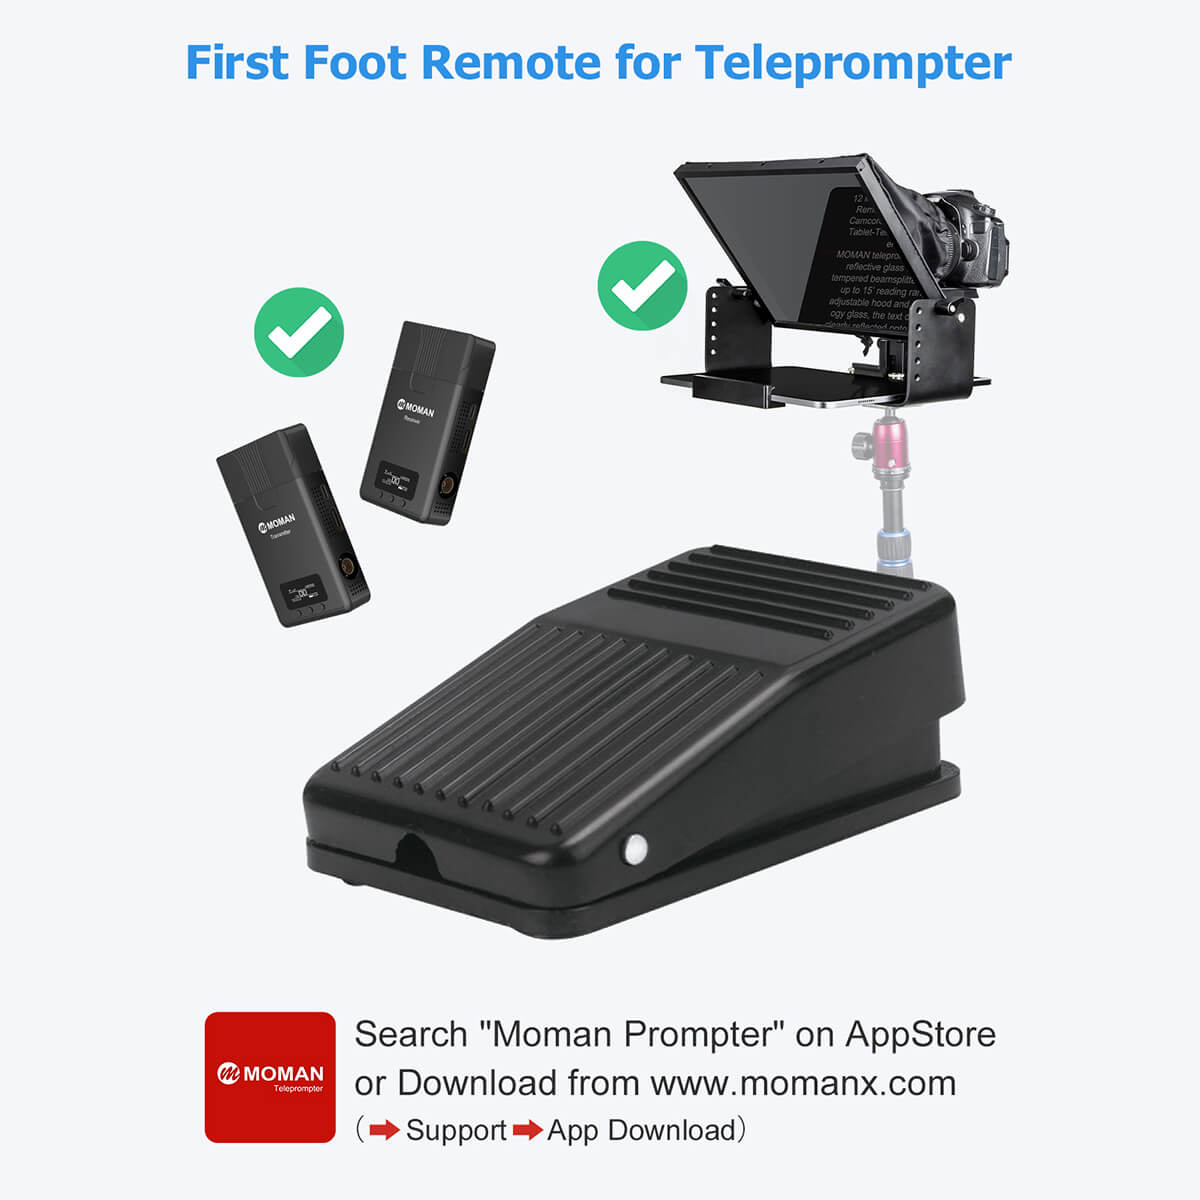 Moman FS1 is the first foot remote for teleprompter. You can download App Moman Prompter for its better using